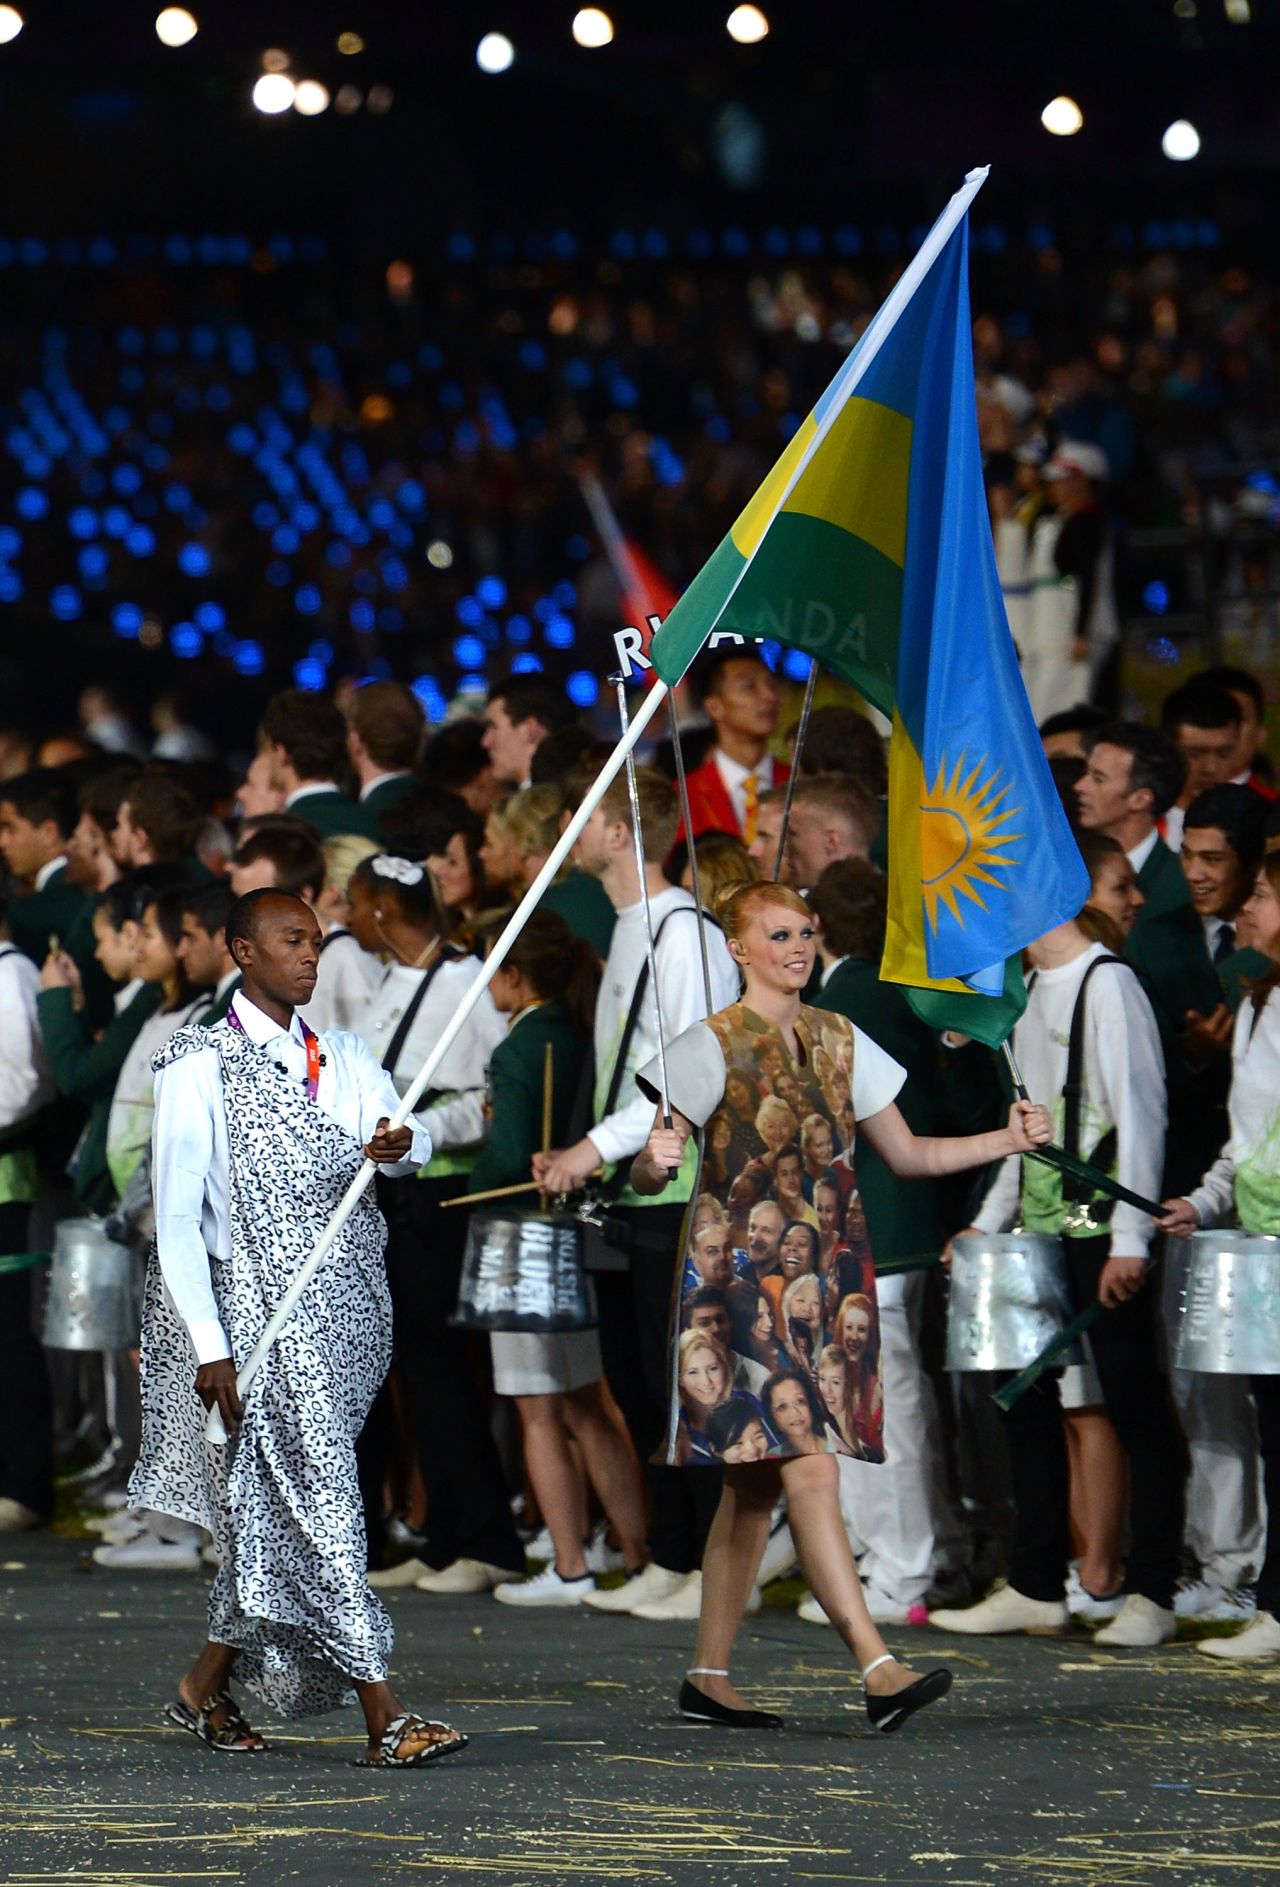 He has overcome the odds to qualify for the London 2012 Olympics, and proudly carried the Rwandan flag during the opening ceremony.